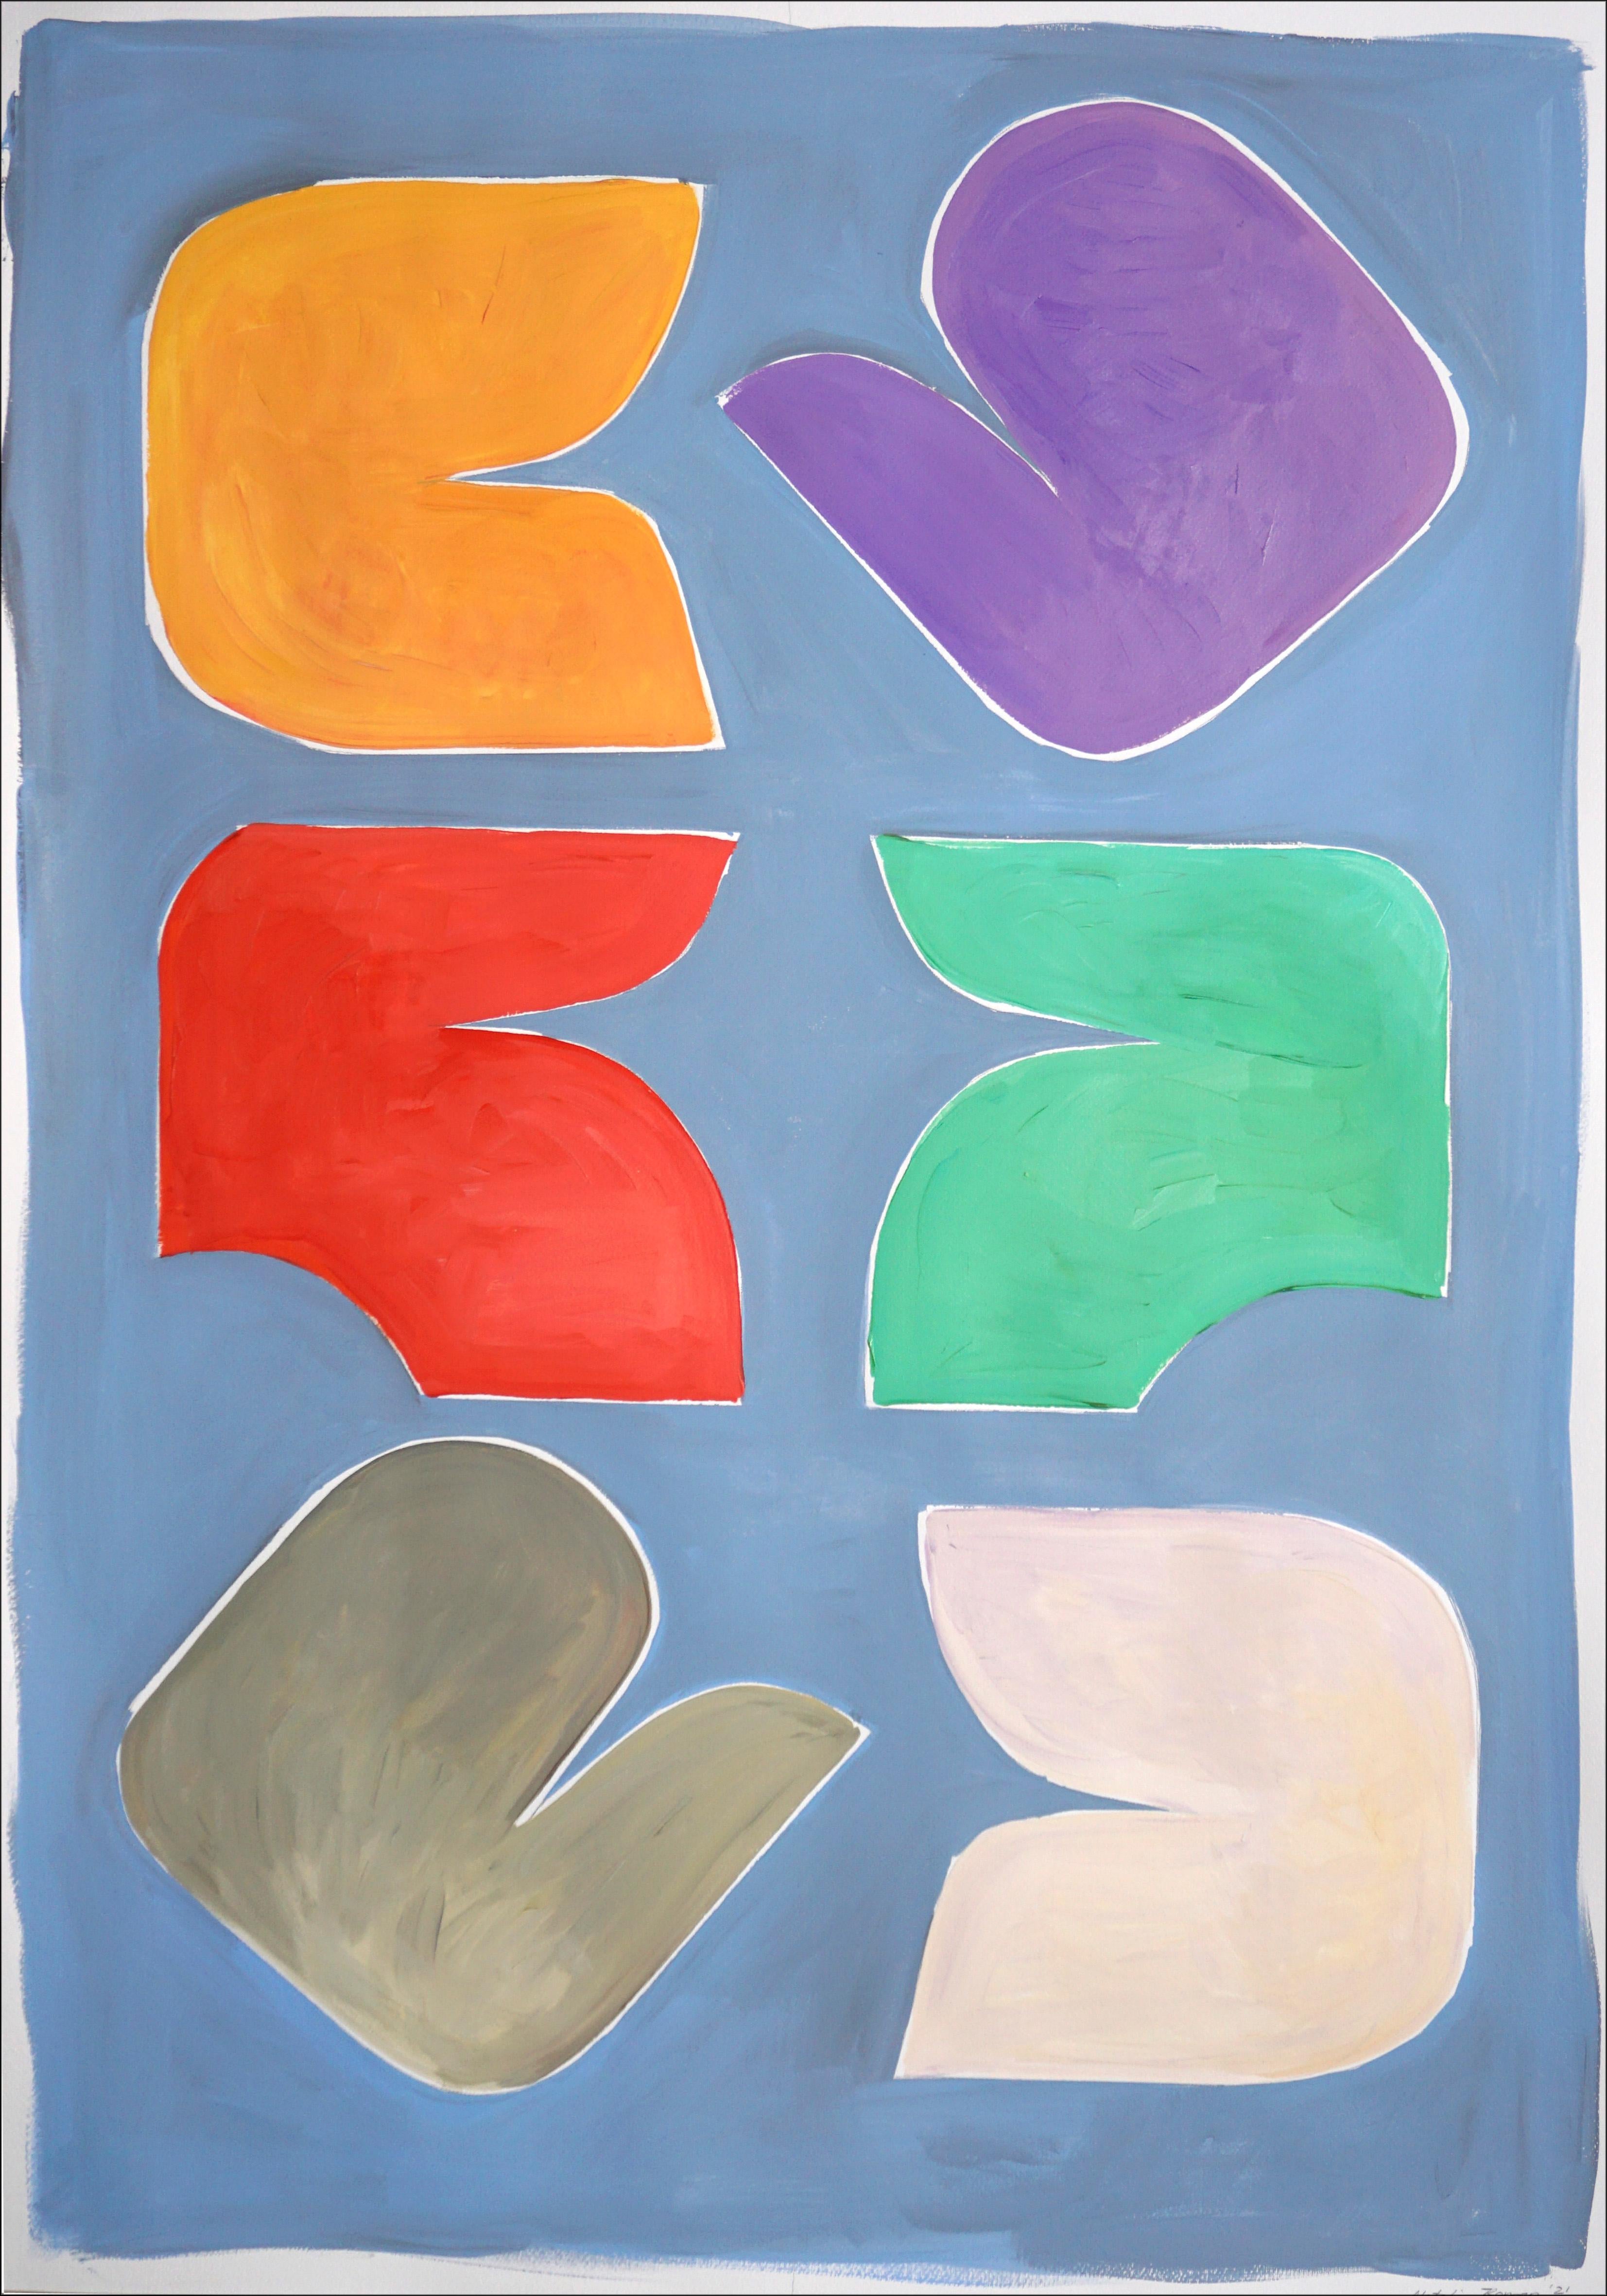 Natalia Roman Abstract Painting - Fifties Block Shapes, Vertical Painting in Complementary Colors, Fresh Tones 